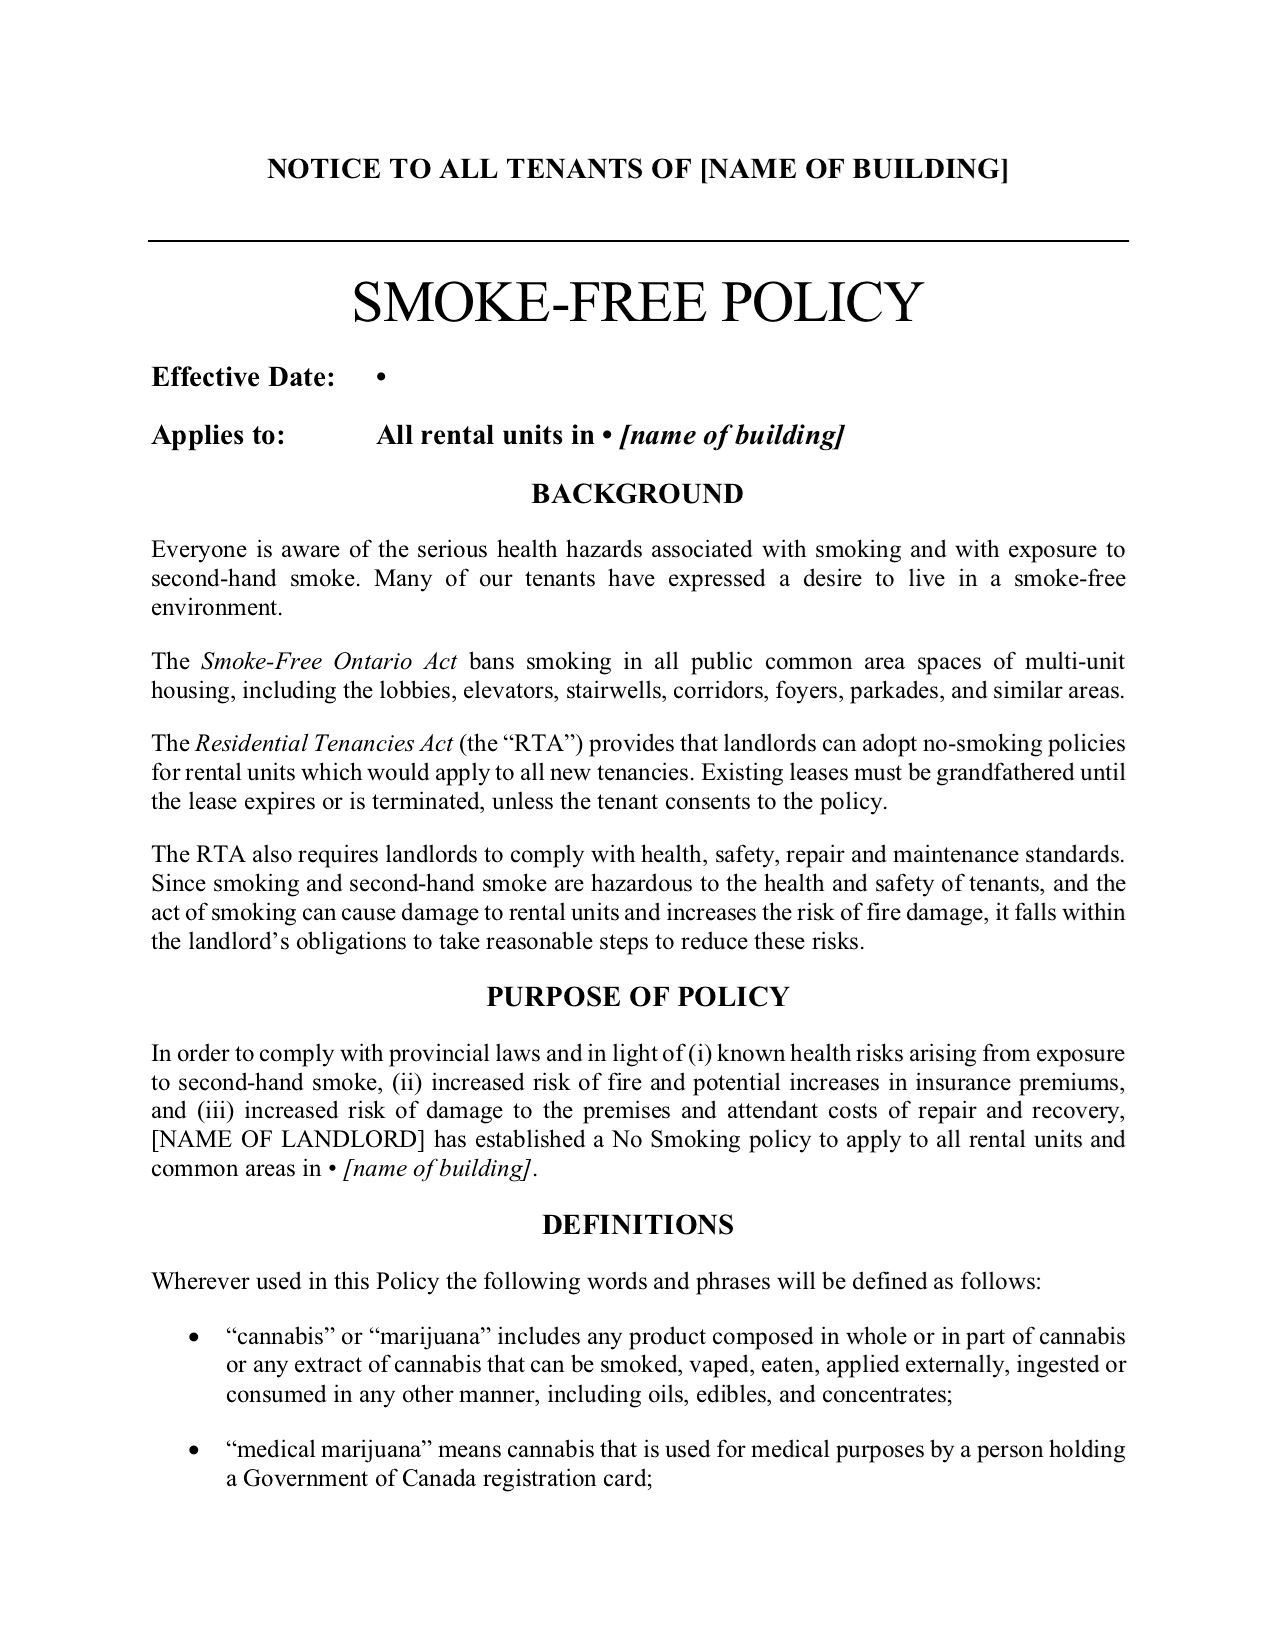 ontario-smoke-free-policy-for-rental-building-legal-forms-and